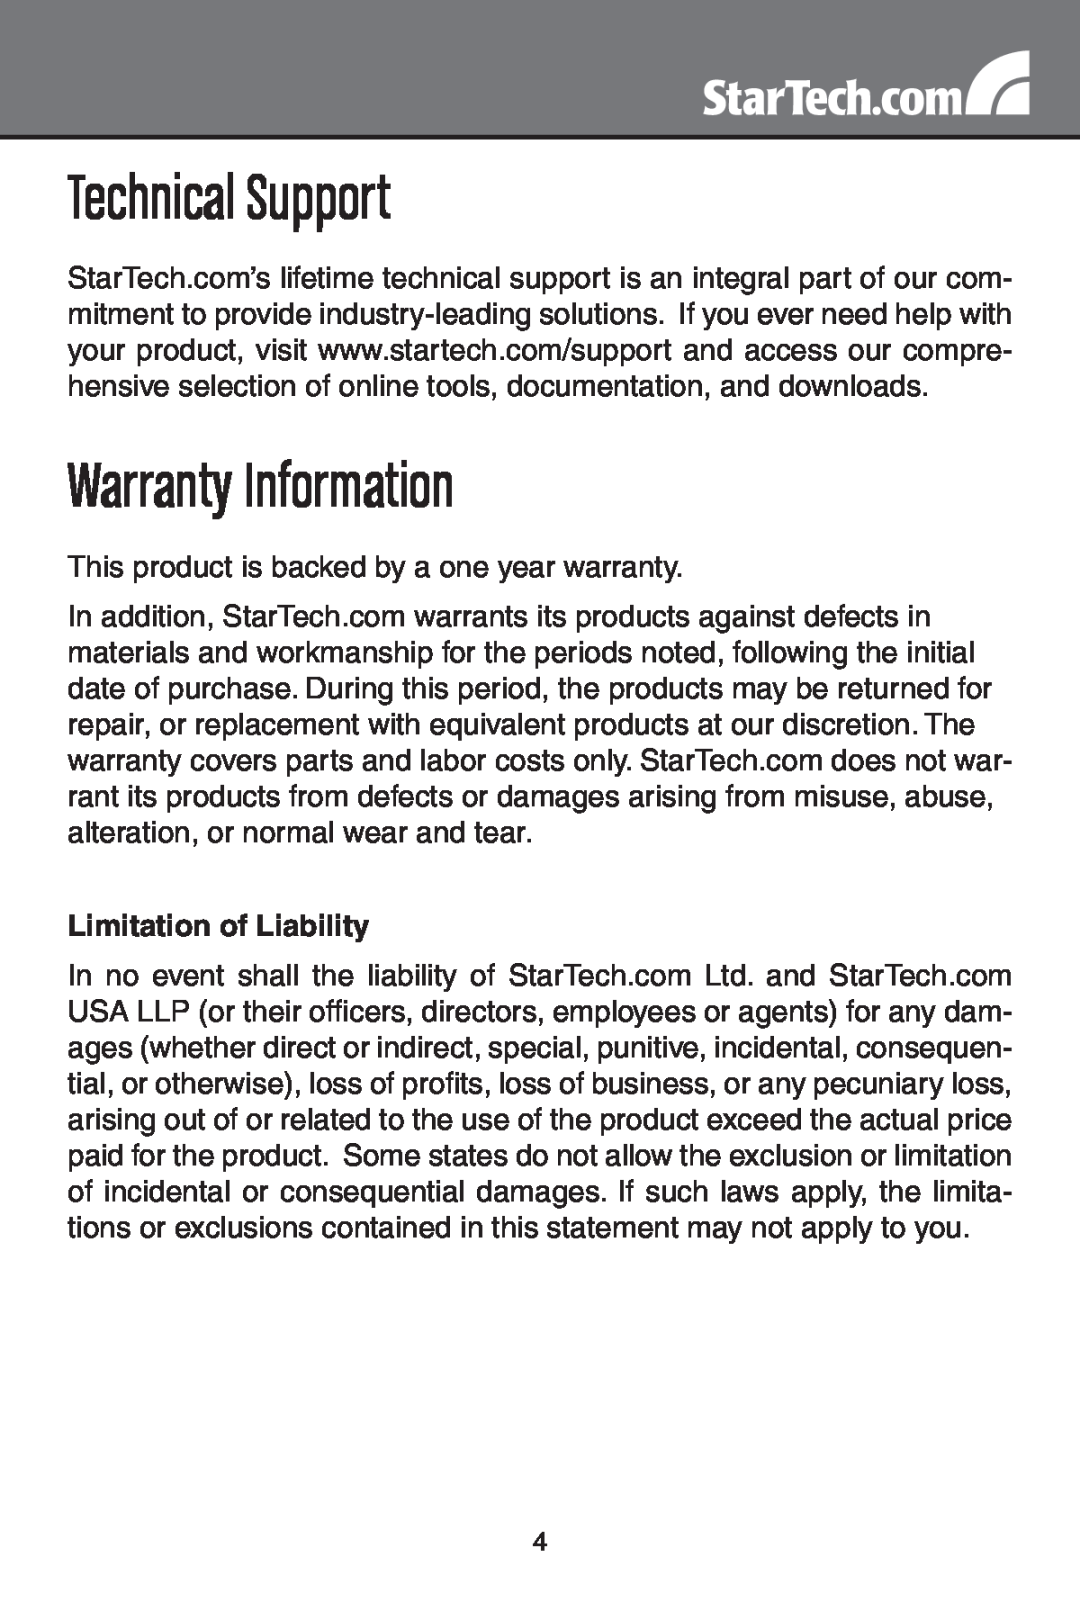 StarTech.com PEX4S952 instruction manual Technical Support, Warranty Information, Limitation of Liability 